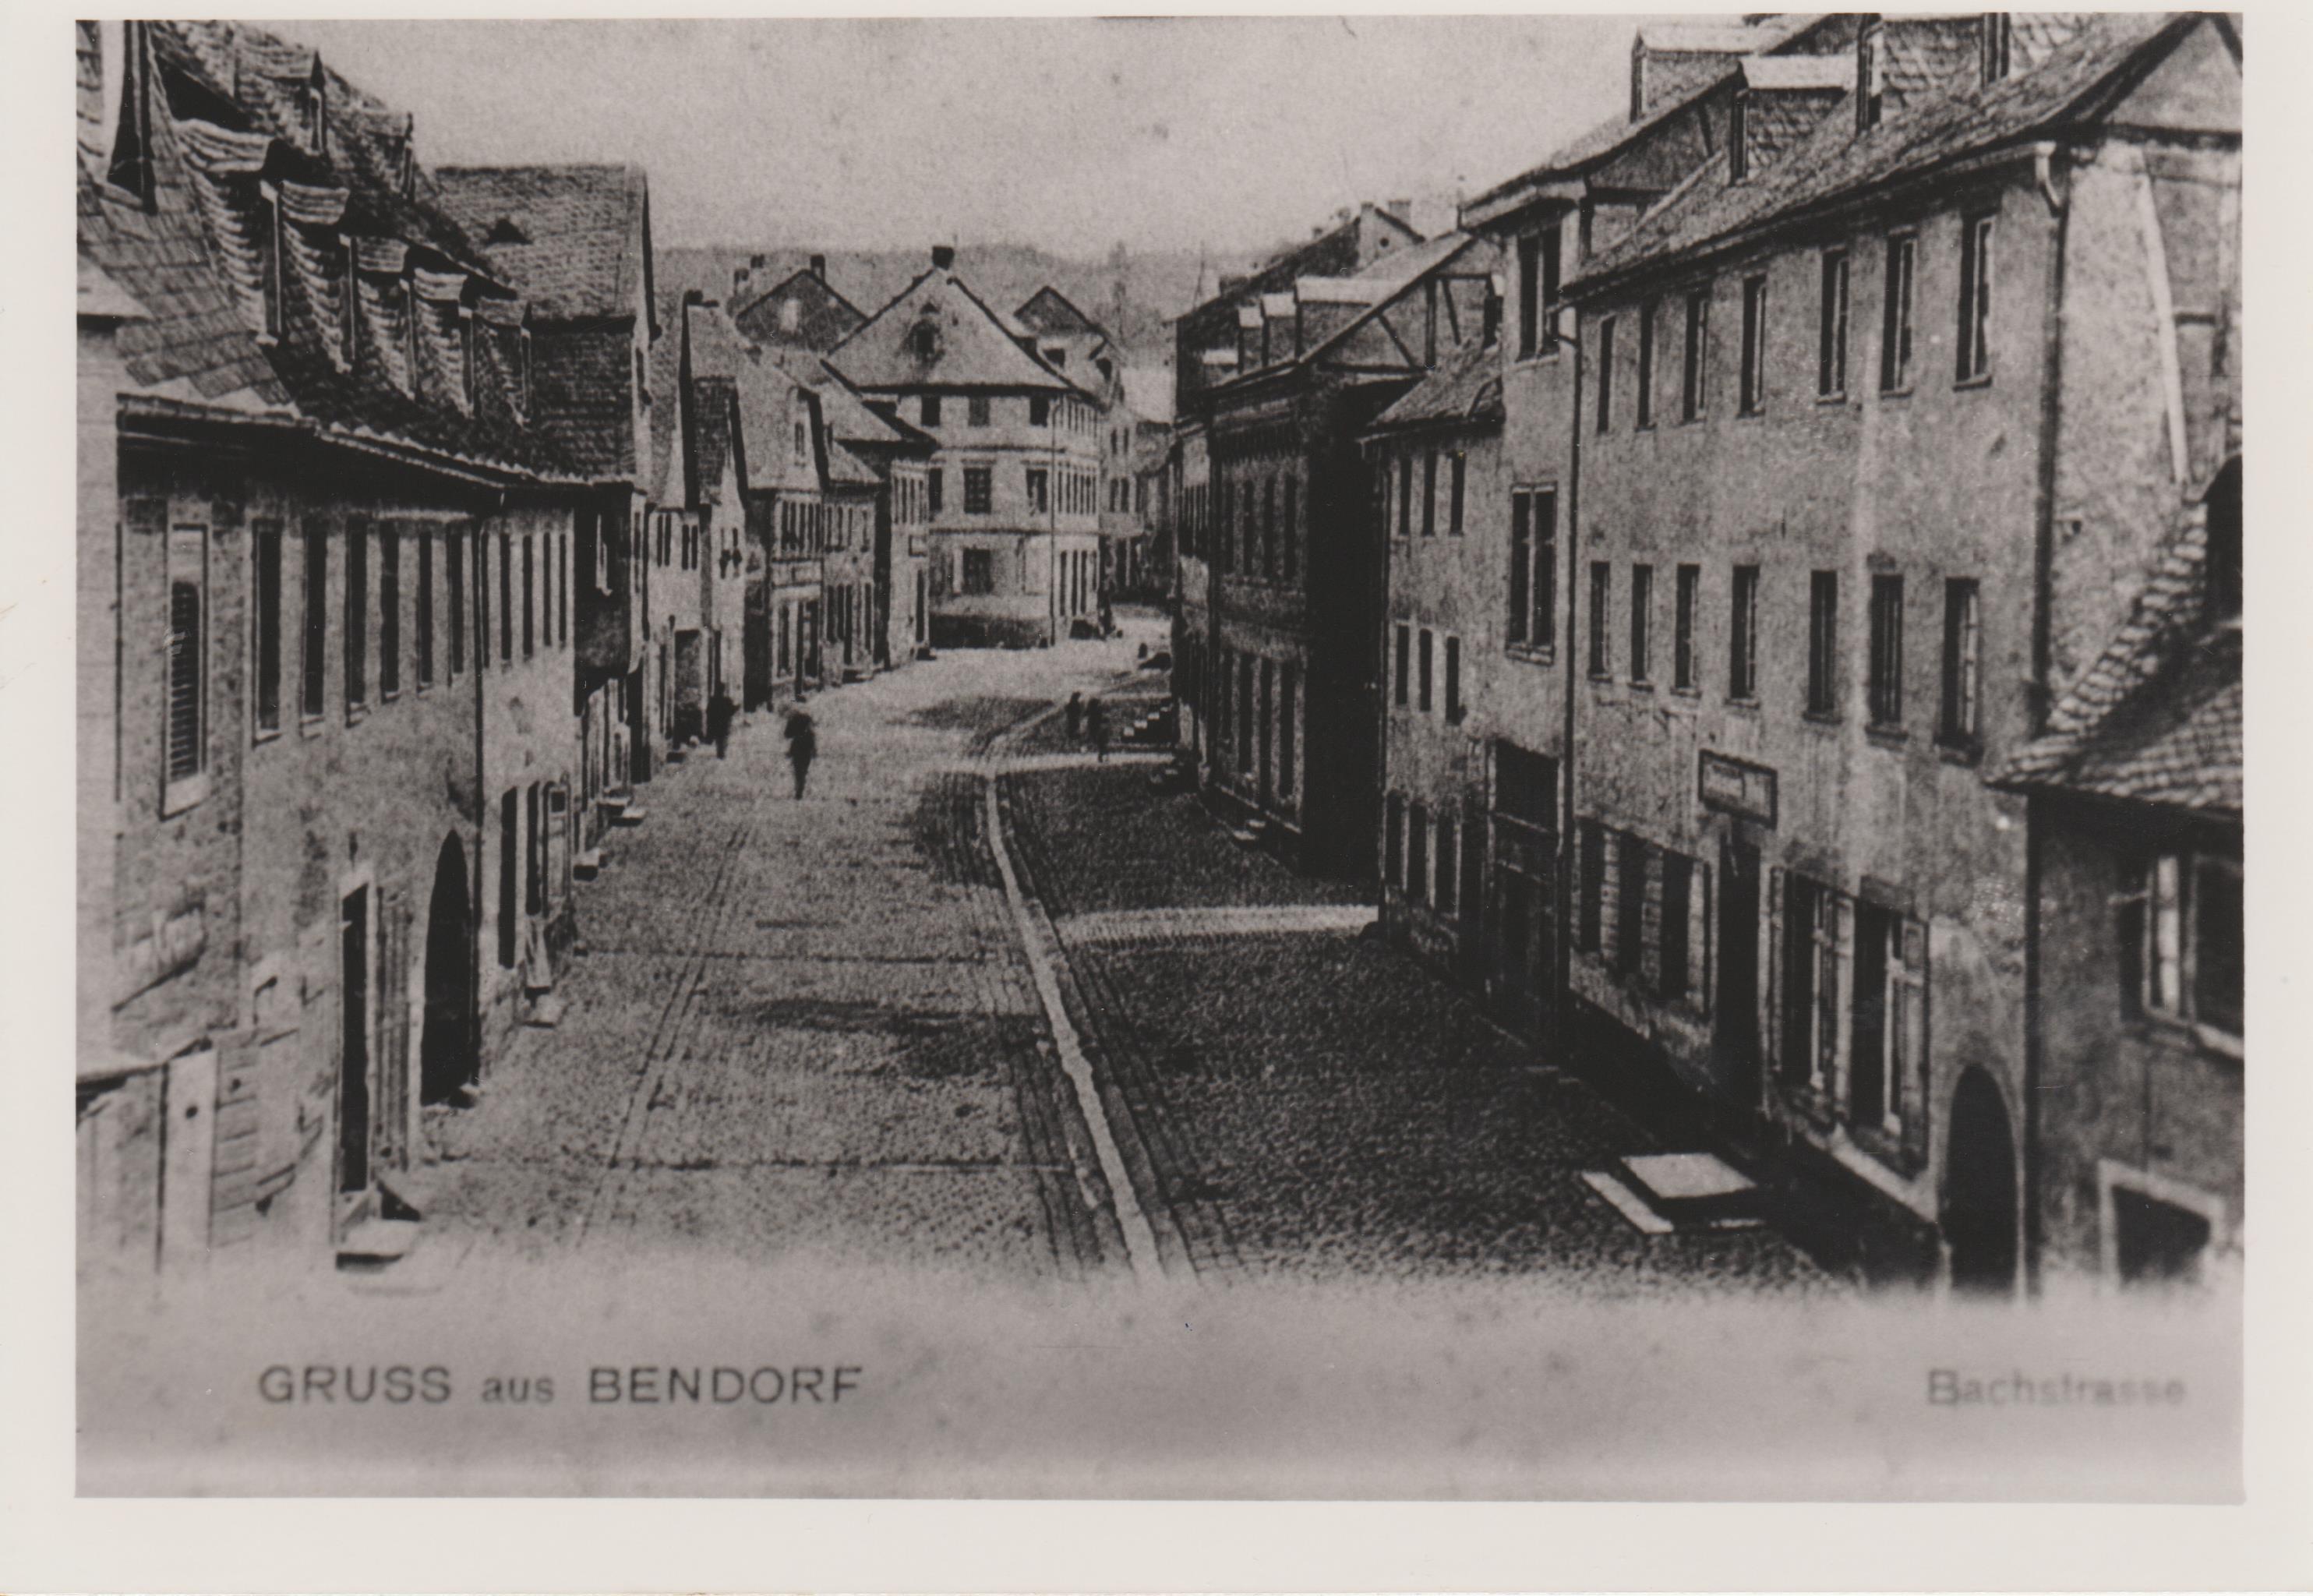 Untere Bachstrasse in Bendorf um 1900 (REM CC BY-NC-SA)